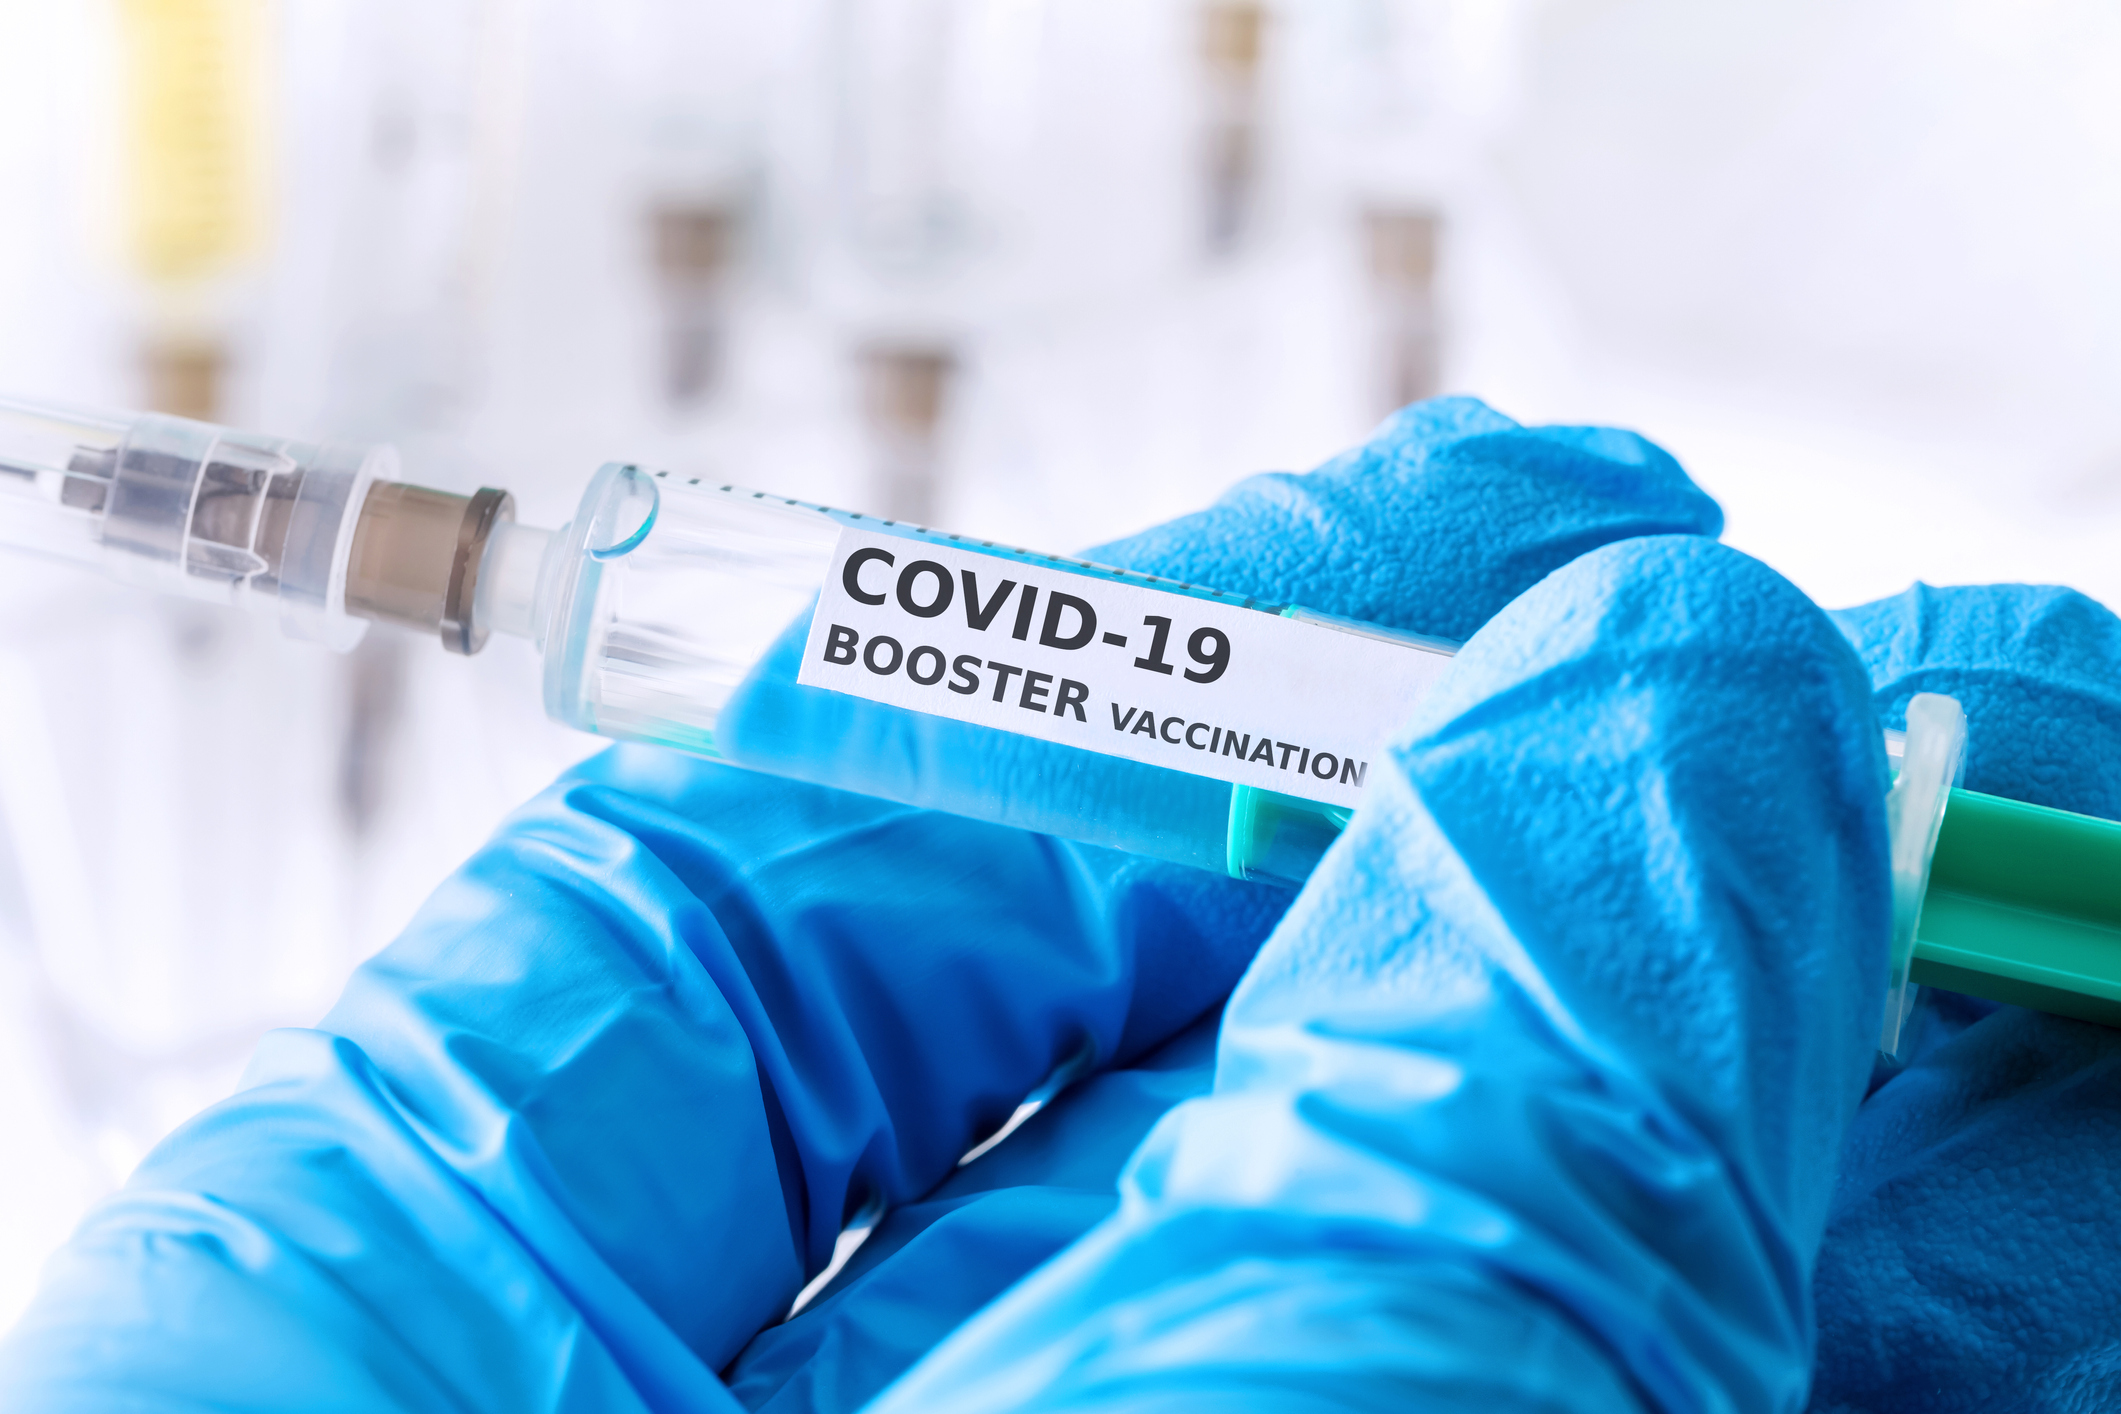 Experts search for a one-and-done, all-purpose COVID-19 vaccine